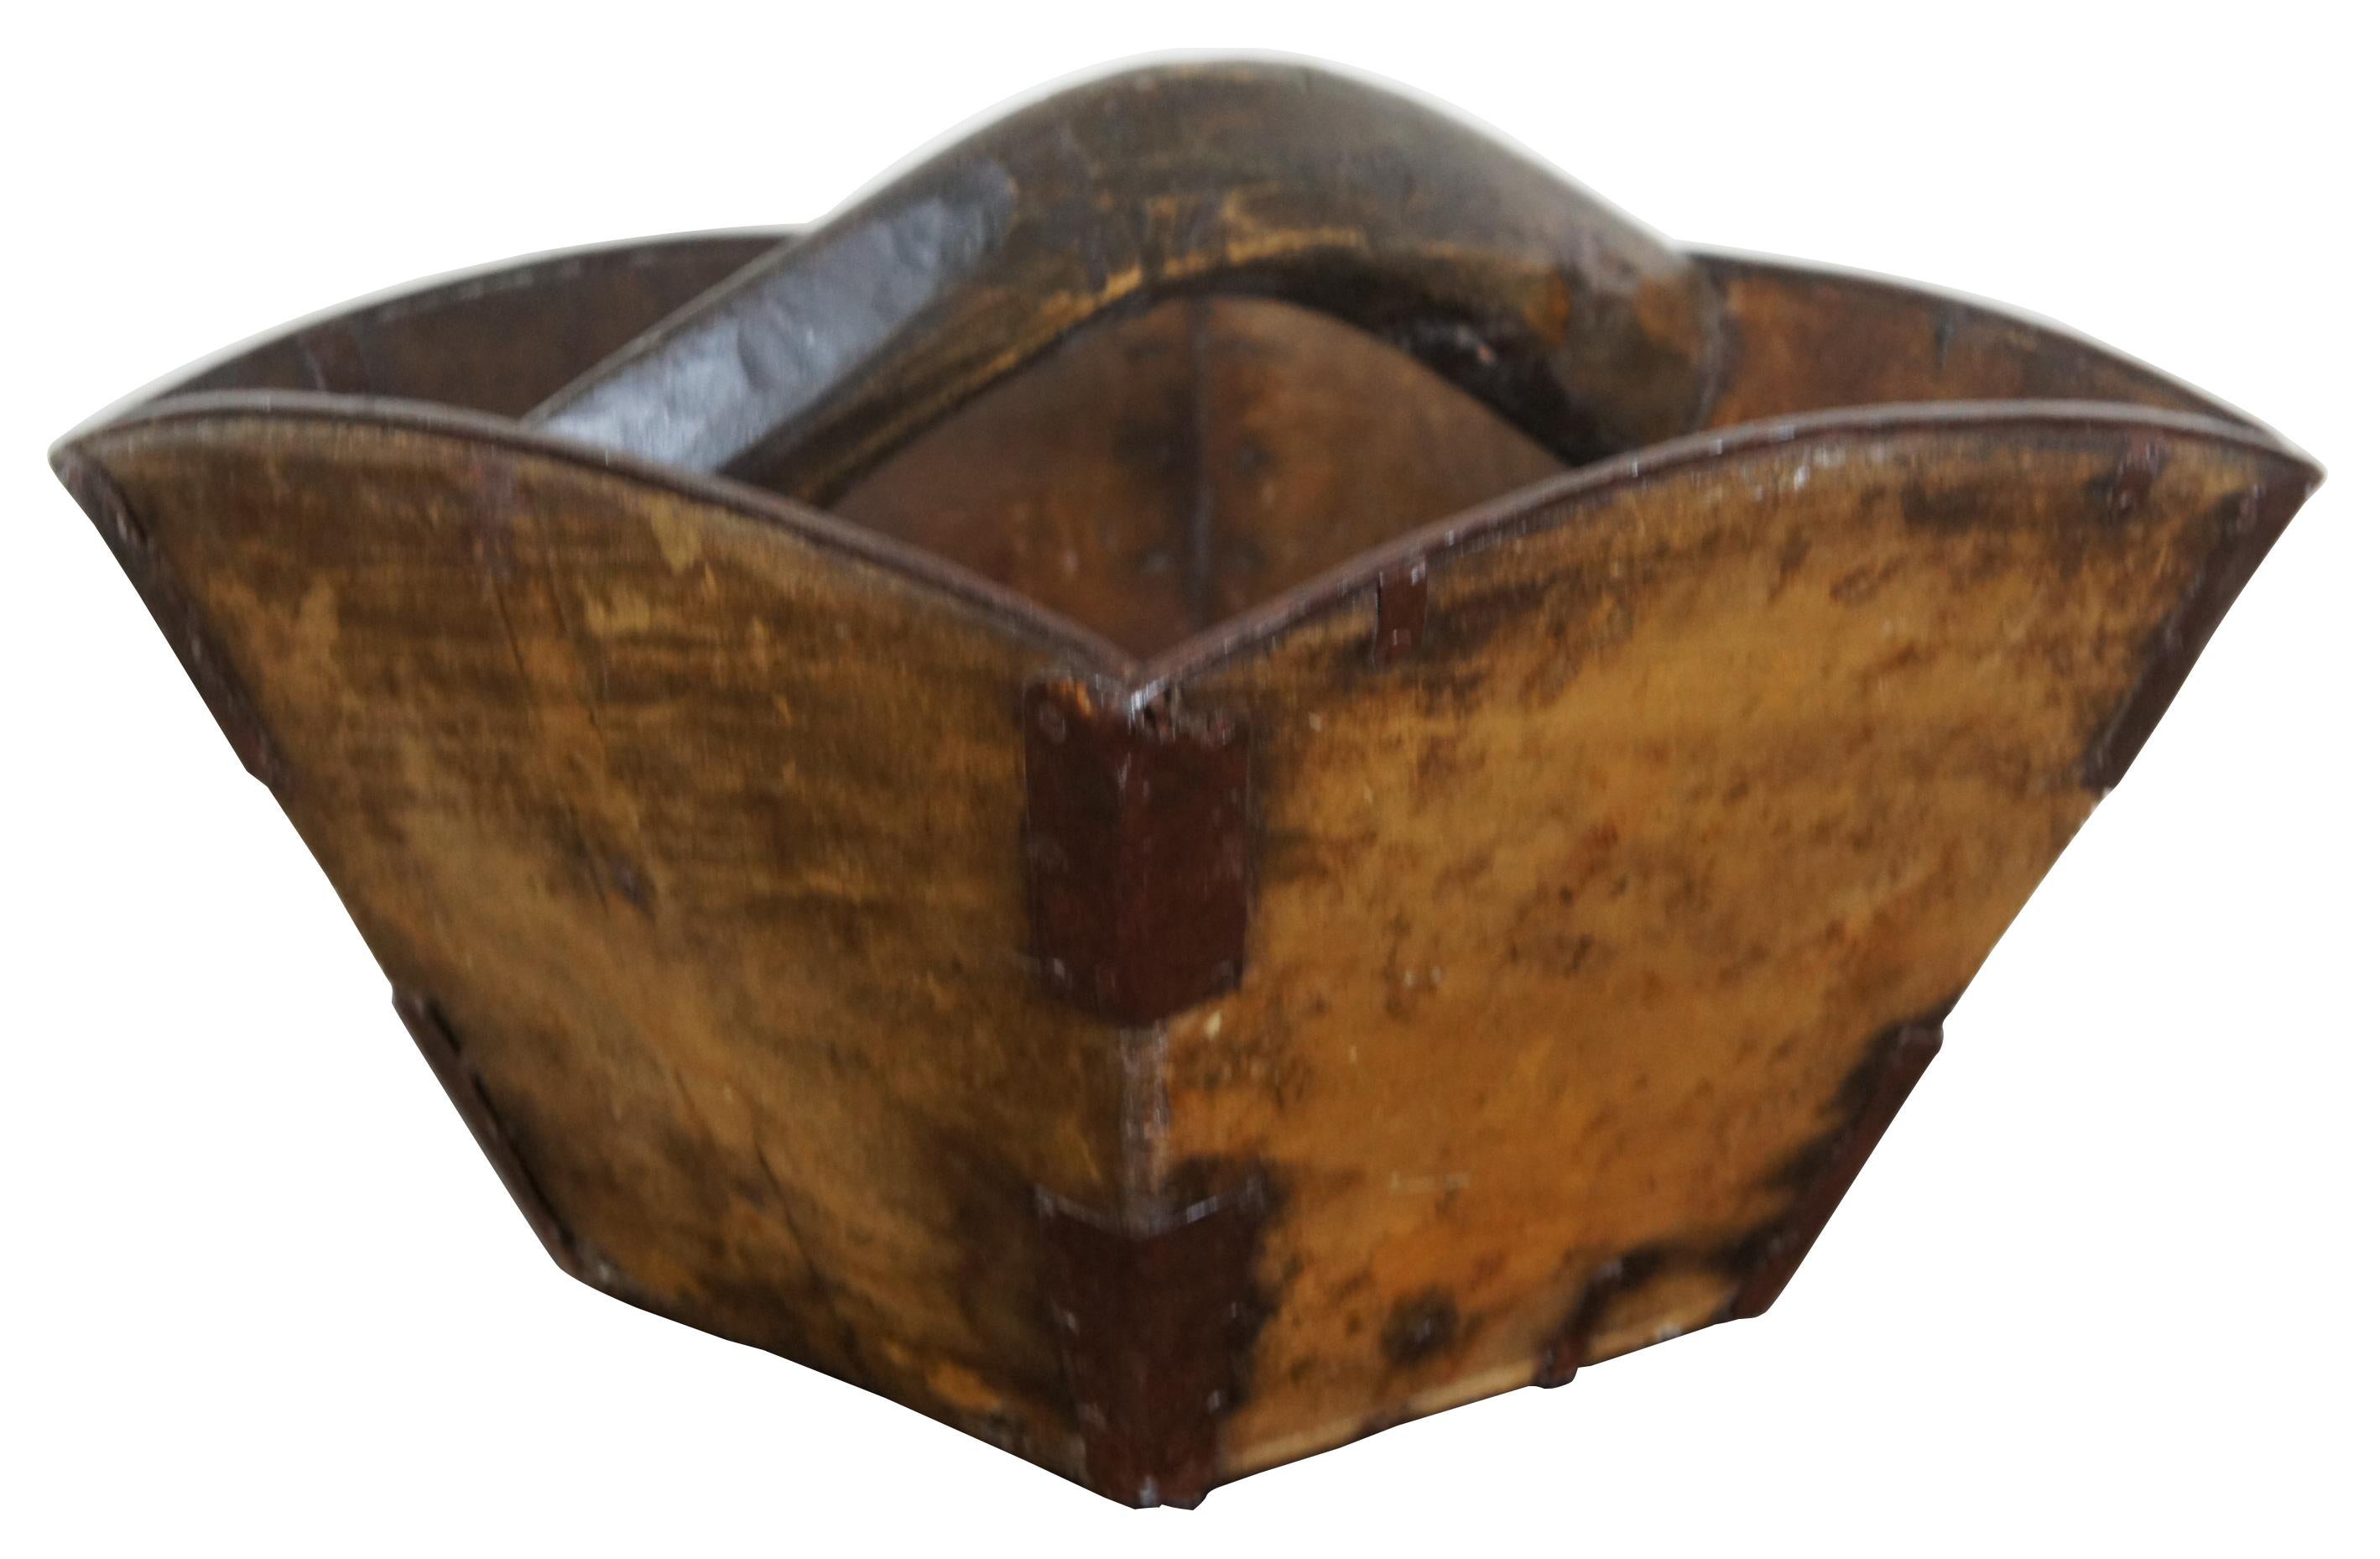 Antique Asian wooden rice bucket with metal reinforced corners, tapered square shape and handle across the middle. Measures: 13